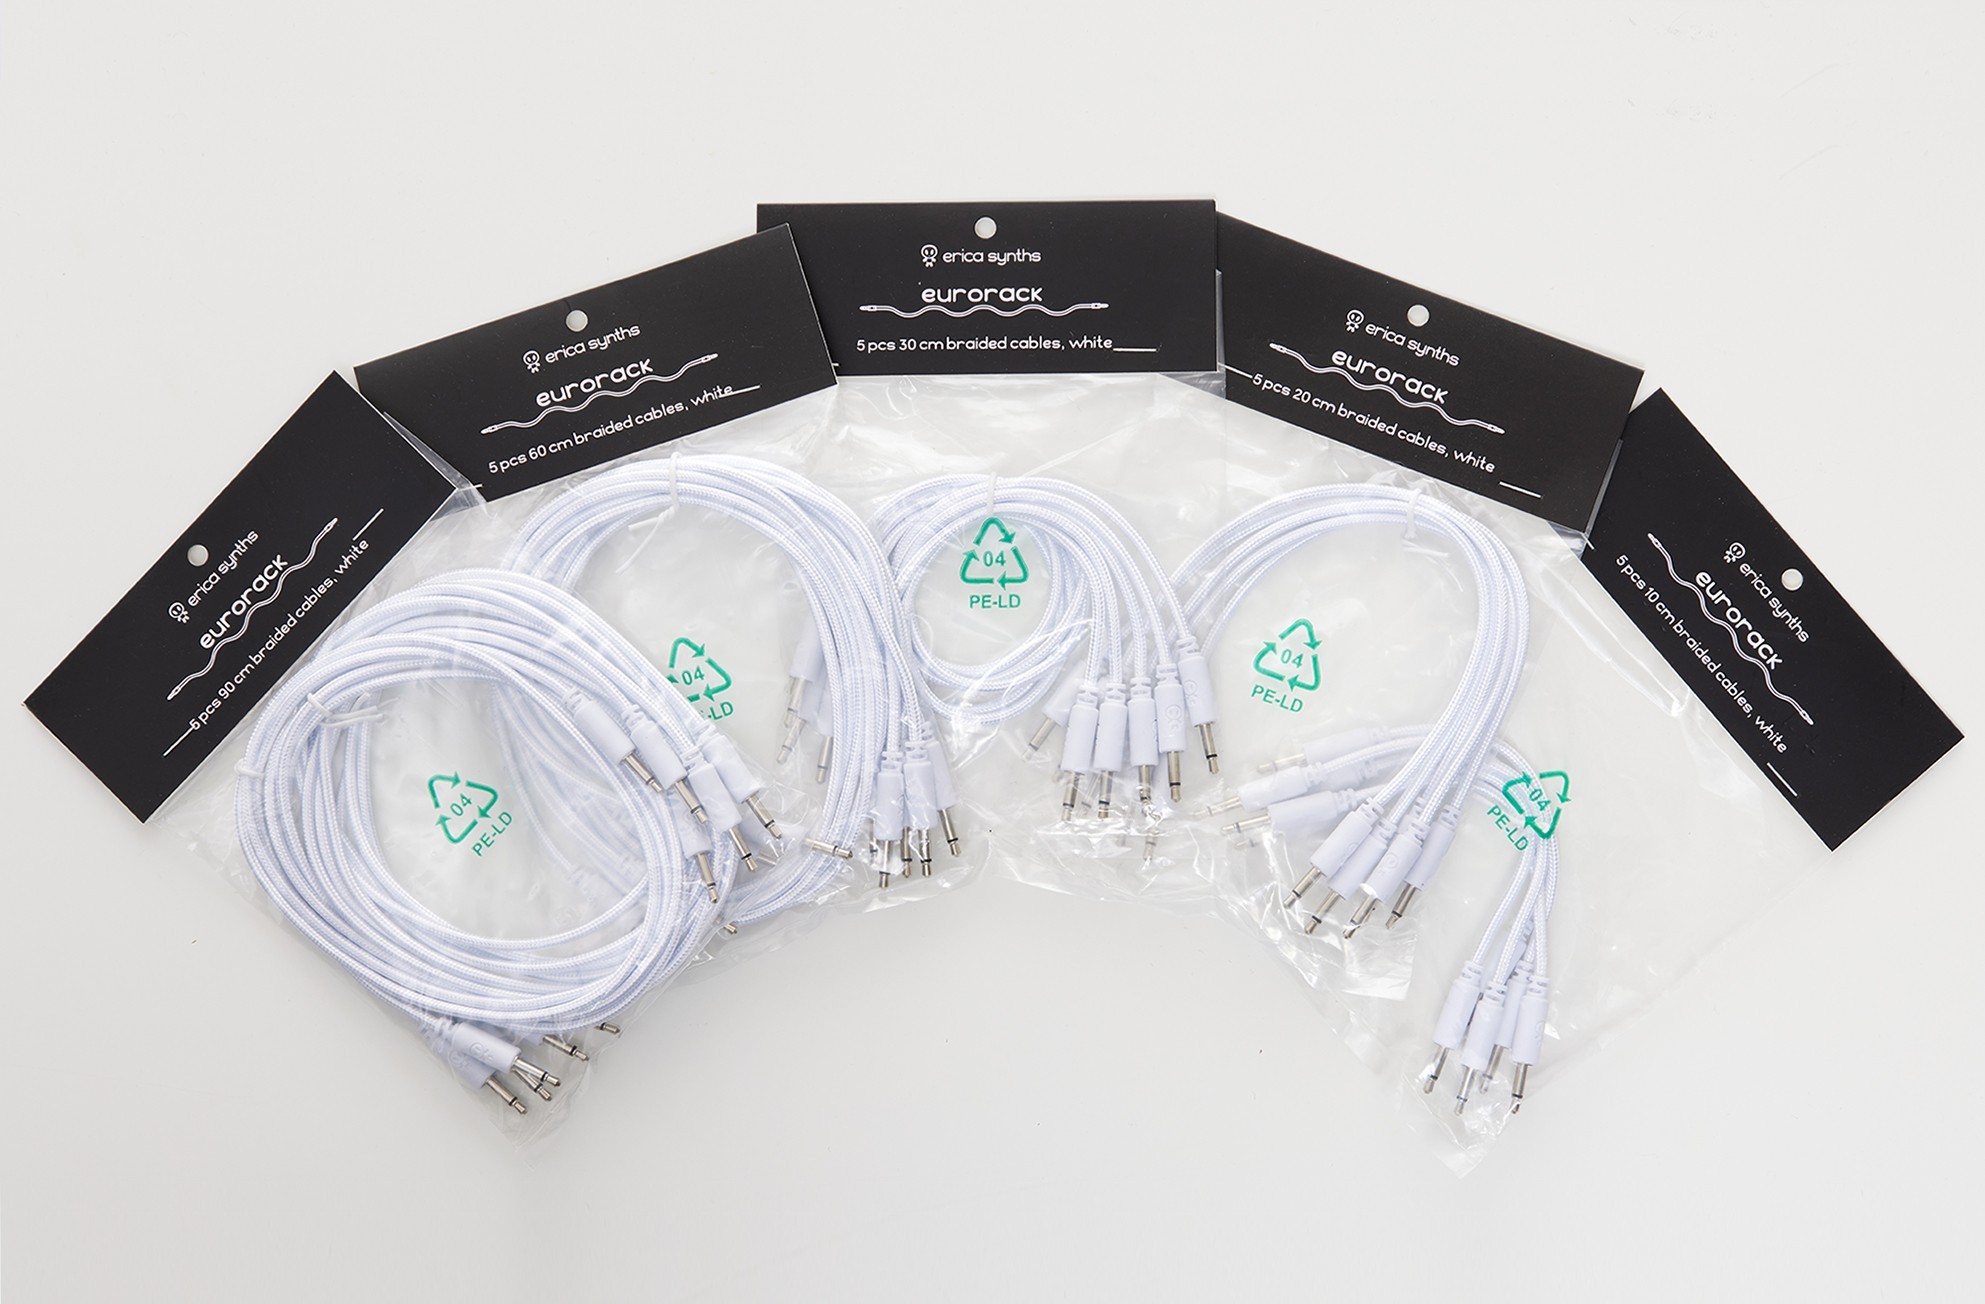 Erica Synths Flettede Eurorack Patch Cables 30cm (5 stk) - Hvid